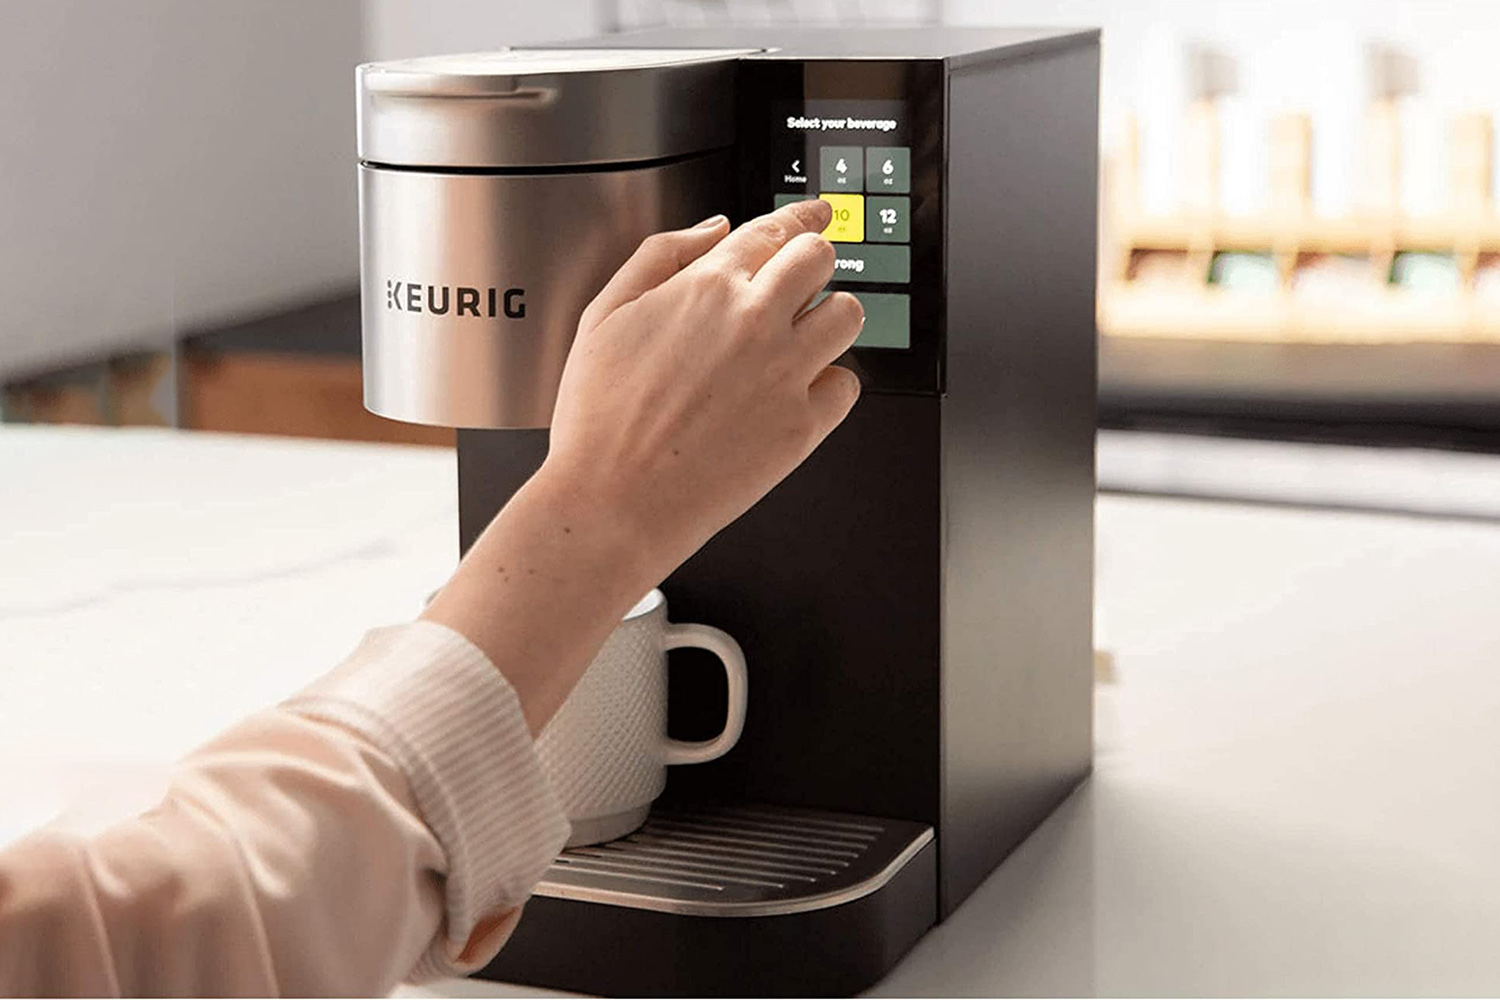 Keurig coffee makers are even cheaper now than on Black Friday